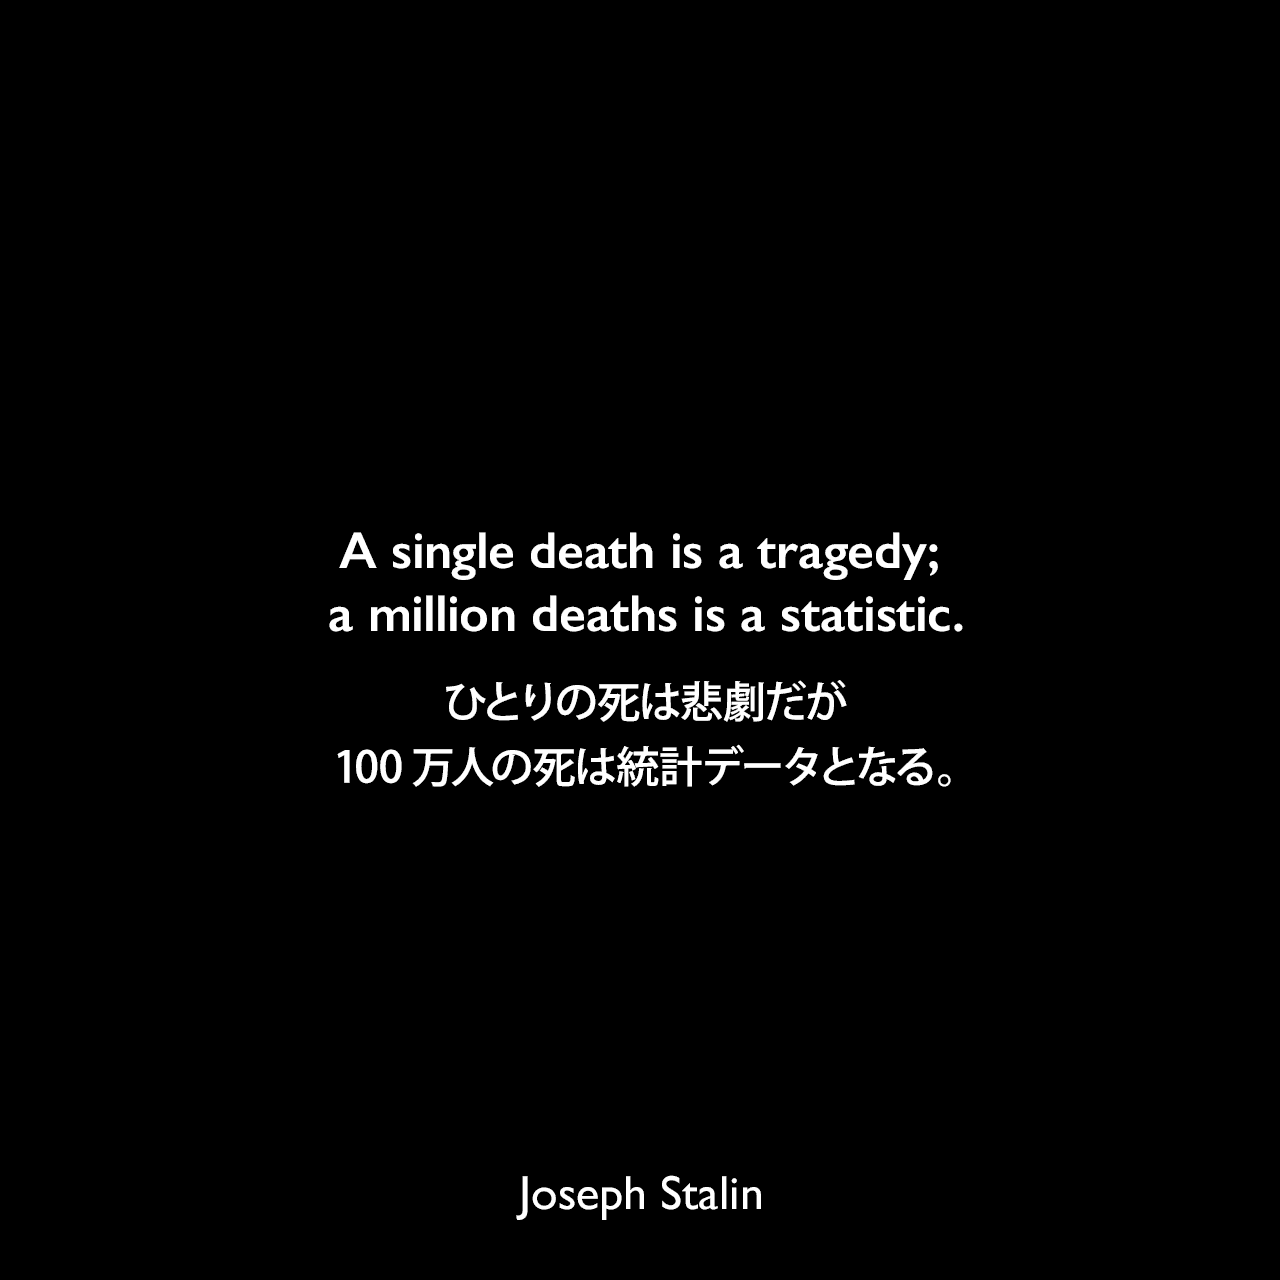 A single death is a tragedy; a million deaths is a statistic.ひとりの死は悲劇だが100万人の死は統計データとなる。Joseph Stalin